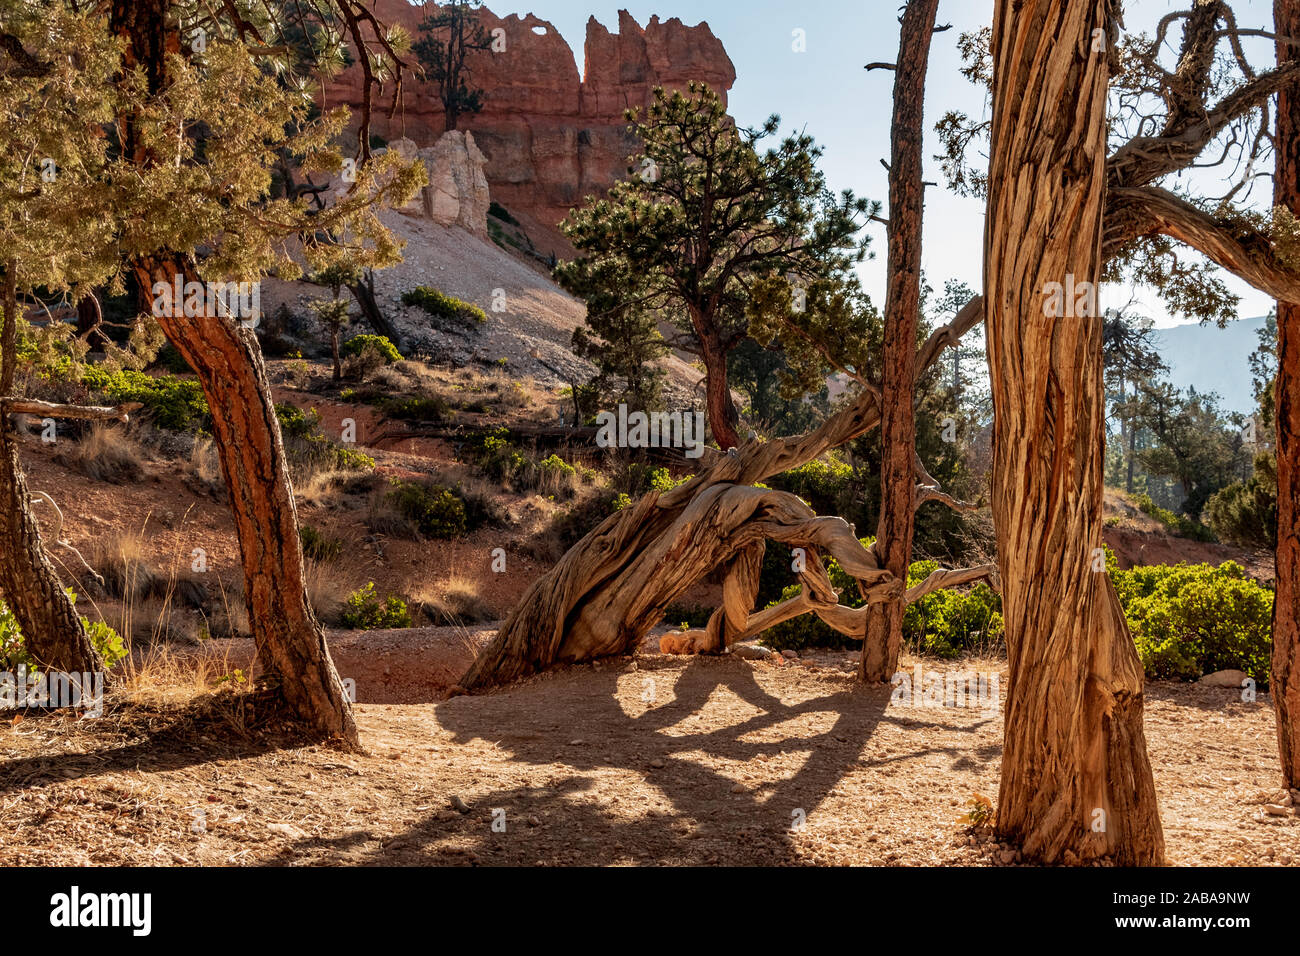 500px Photo Id 1006566249 Morning Sun On Old Tree With Rock Formation In Background Stock Photo Alamy